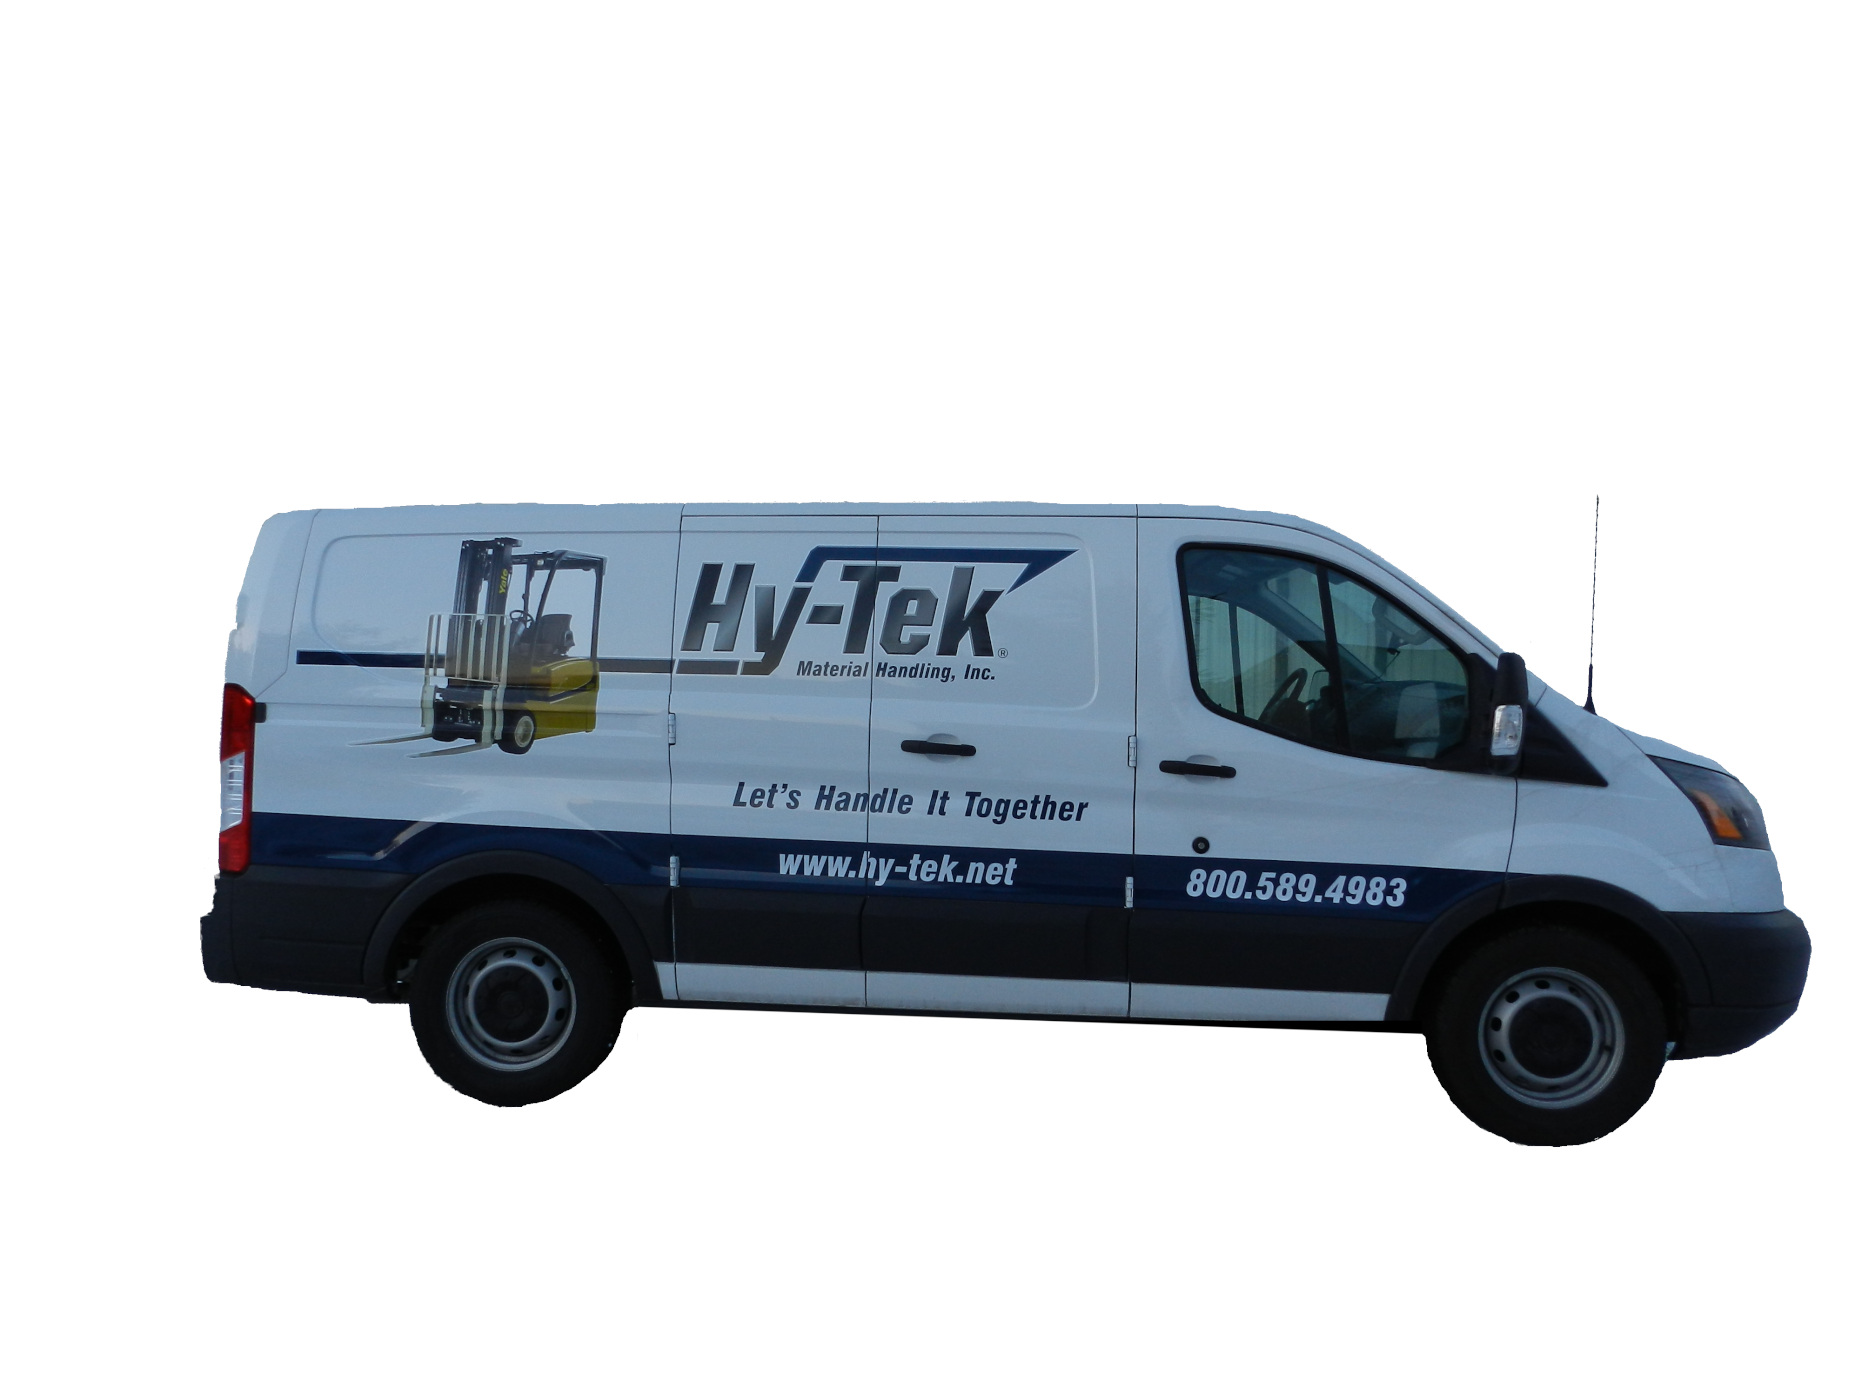 Hy-Tek Intralogistics  Material Handling Systems & Support